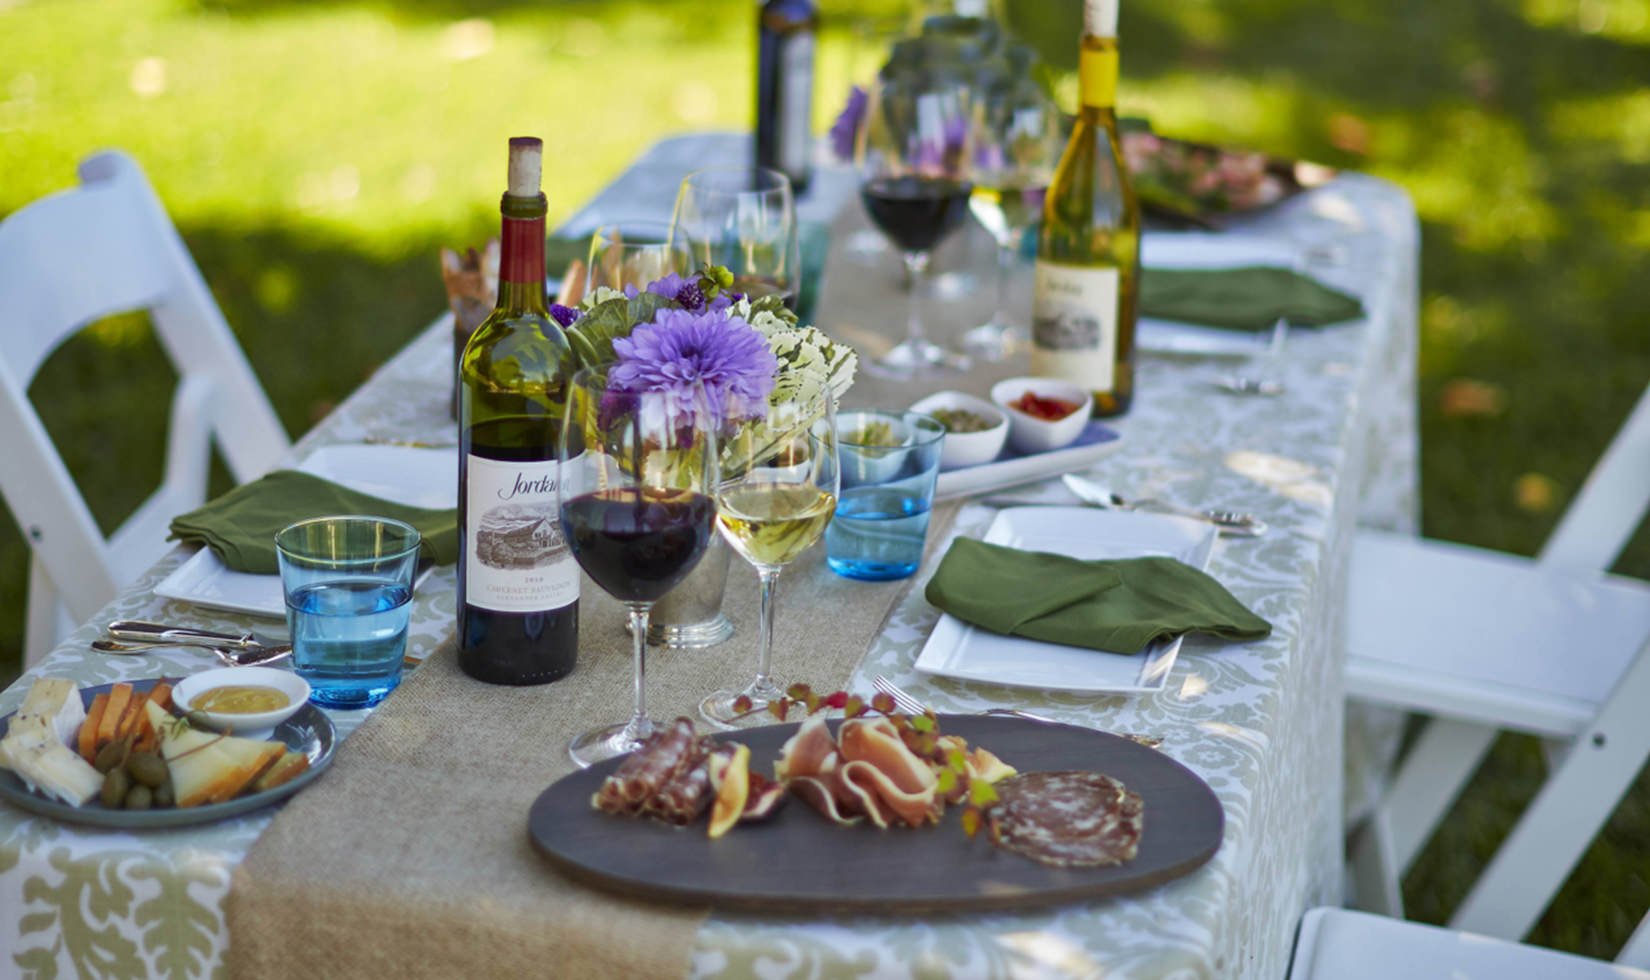 alfresco table setting for a casual lunch experience at Jordan Winery